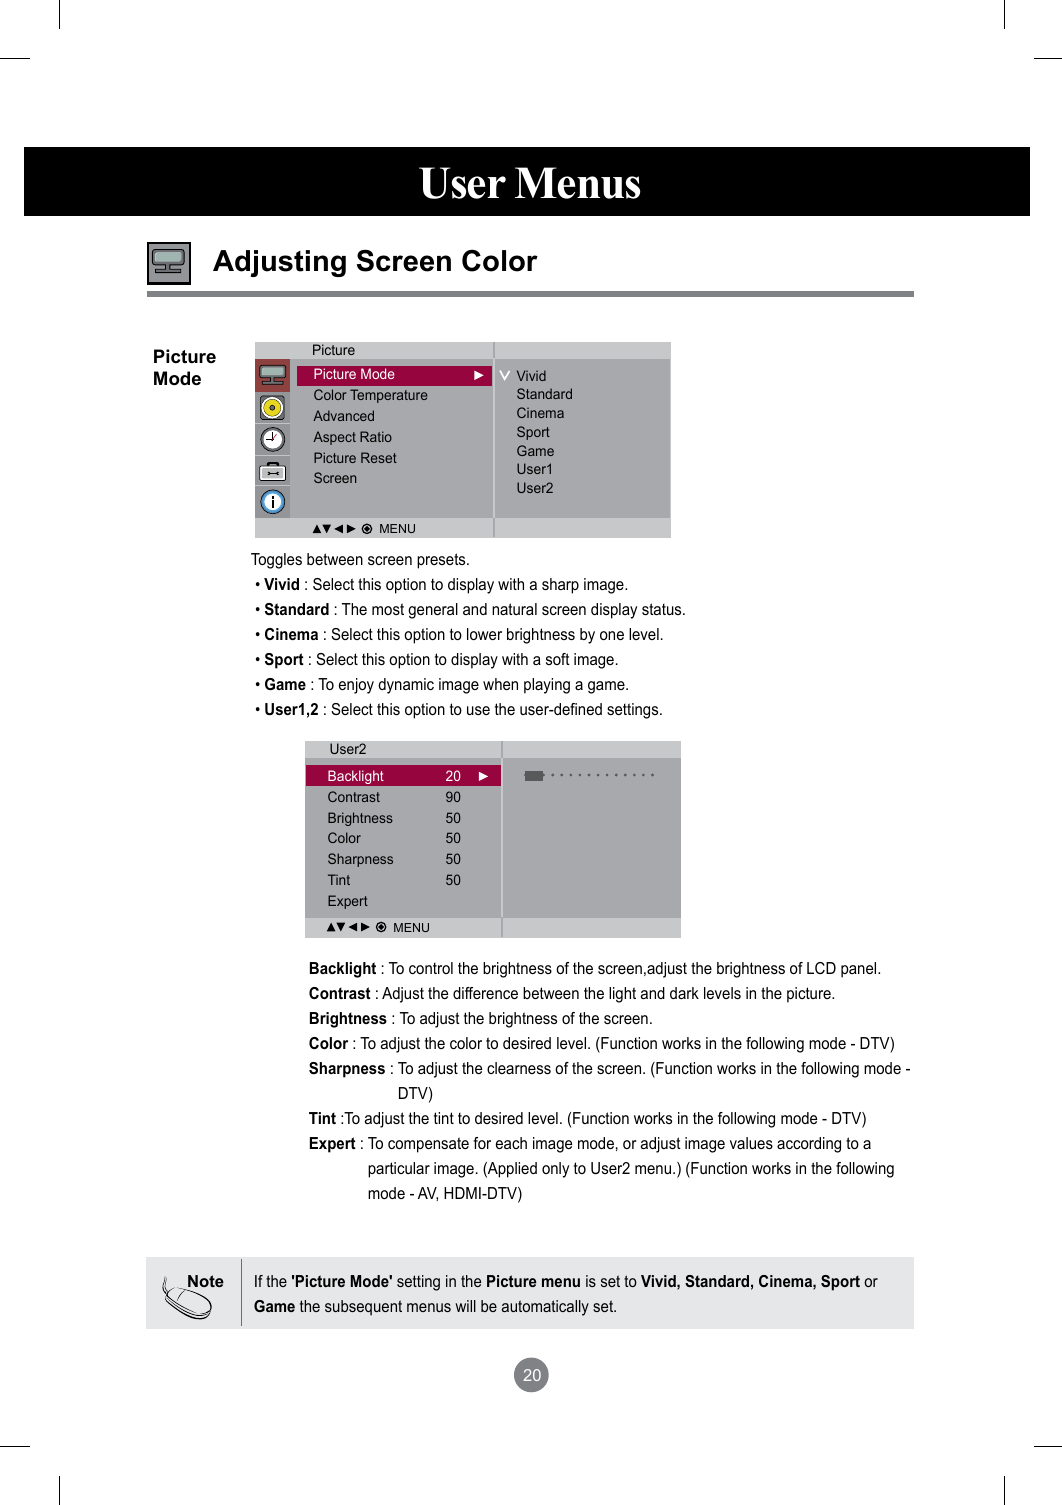 20User MenusAdjusting Screen ColorBacklight : To control the brightness of the screen,adjust the brightness of LCD panel.Contrast : Adjust the difference between the light and dark levels in the picture.Brightness : To adjust the brightness of the screen.Color : To adjust the color to desired level. (Function works in the following mode - DTV)Sharpness :  To adjust the clearness of the screen. (Function works in the following mode - DTV)Tint :To adjust the tint to desired level. (Function works in the following mode - DTV) Expert :  To compensate for each image mode, or adjust image values according to a particular image. (Applied only to User2 menu.) (Function works in the following mode - AV, HDMI-DTV)Toggles between screen presets. • Vivid : Select this option to display with a sharp image.  • Standard : The most general and natural screen display status. • Cinema : Select this option to lower brightness by one level.  • Sport : Select this option to display with a soft image. • Game : To enjoy dynamic image when playing a game.  • User1,2 : Select this option to use the user-defined settings.PictureModeNoteIf the &apos;Picture Mode&apos; setting in the Picture menu is set to Vivid, Standard, Cinema, Sport or Game the subsequent menus will be automatically set.PicturePicture ModeColor TemperatureAdvancedAspect RatioPicture ResetScreenVividStandardCinemaSportGameUser1User2User2Backlight  20Contrast  90Brightness  50Color  50Sharpness  50Tint  50Expert MENUMENU